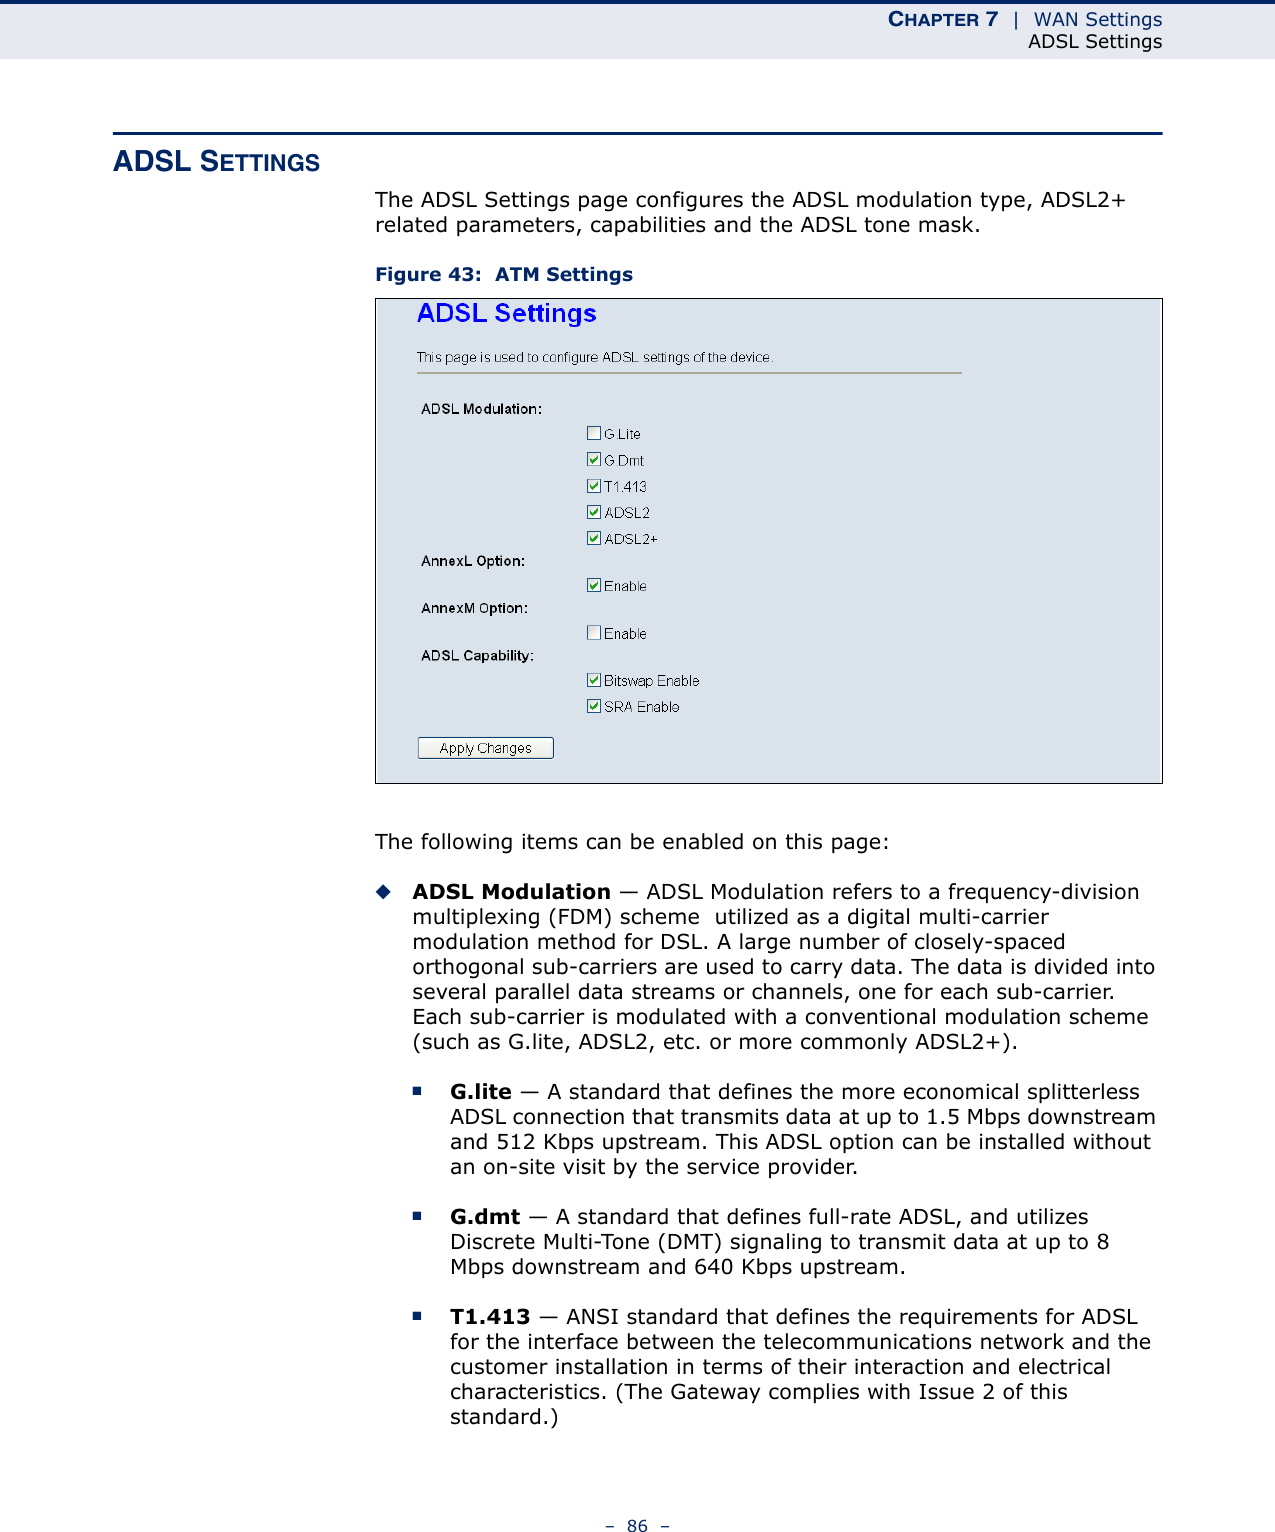 CHAPTER 7  |  WAN SettingsADSL Settings–  86  –ADSL SETTINGSThe ADSL Settings page configures the ADSL modulation type, ADSL2+ related parameters, capabilities and the ADSL tone mask.Figure 43:  ATM SettingsThe following items can be enabled on this page:◆ADSL Modulation — ADSL Modulation refers to a frequency-division multiplexing (FDM) scheme  utilized as a digital multi-carrier modulation method for DSL. A large number of closely-spaced orthogonal sub-carriers are used to carry data. The data is divided into several parallel data streams or channels, one for each sub-carrier. Each sub-carrier is modulated with a conventional modulation scheme (such as G.lite, ADSL2, etc. or more commonly ADSL2+).■G.lite — A standard that defines the more economical splitterless ADSL connection that transmits data at up to 1.5 Mbps downstream and 512 Kbps upstream. This ADSL option can be installed without an on-site visit by the service provider.■G.dmt — A standard that defines full-rate ADSL, and utilizes Discrete Multi-Tone (DMT) signaling to transmit data at up to 8 Mbps downstream and 640 Kbps upstream.■T1.413 — ANSI standard that defines the requirements for ADSL for the interface between the telecommunications network and the customer installation in terms of their interaction and electrical characteristics. (The Gateway complies with Issue 2 of this standard.)